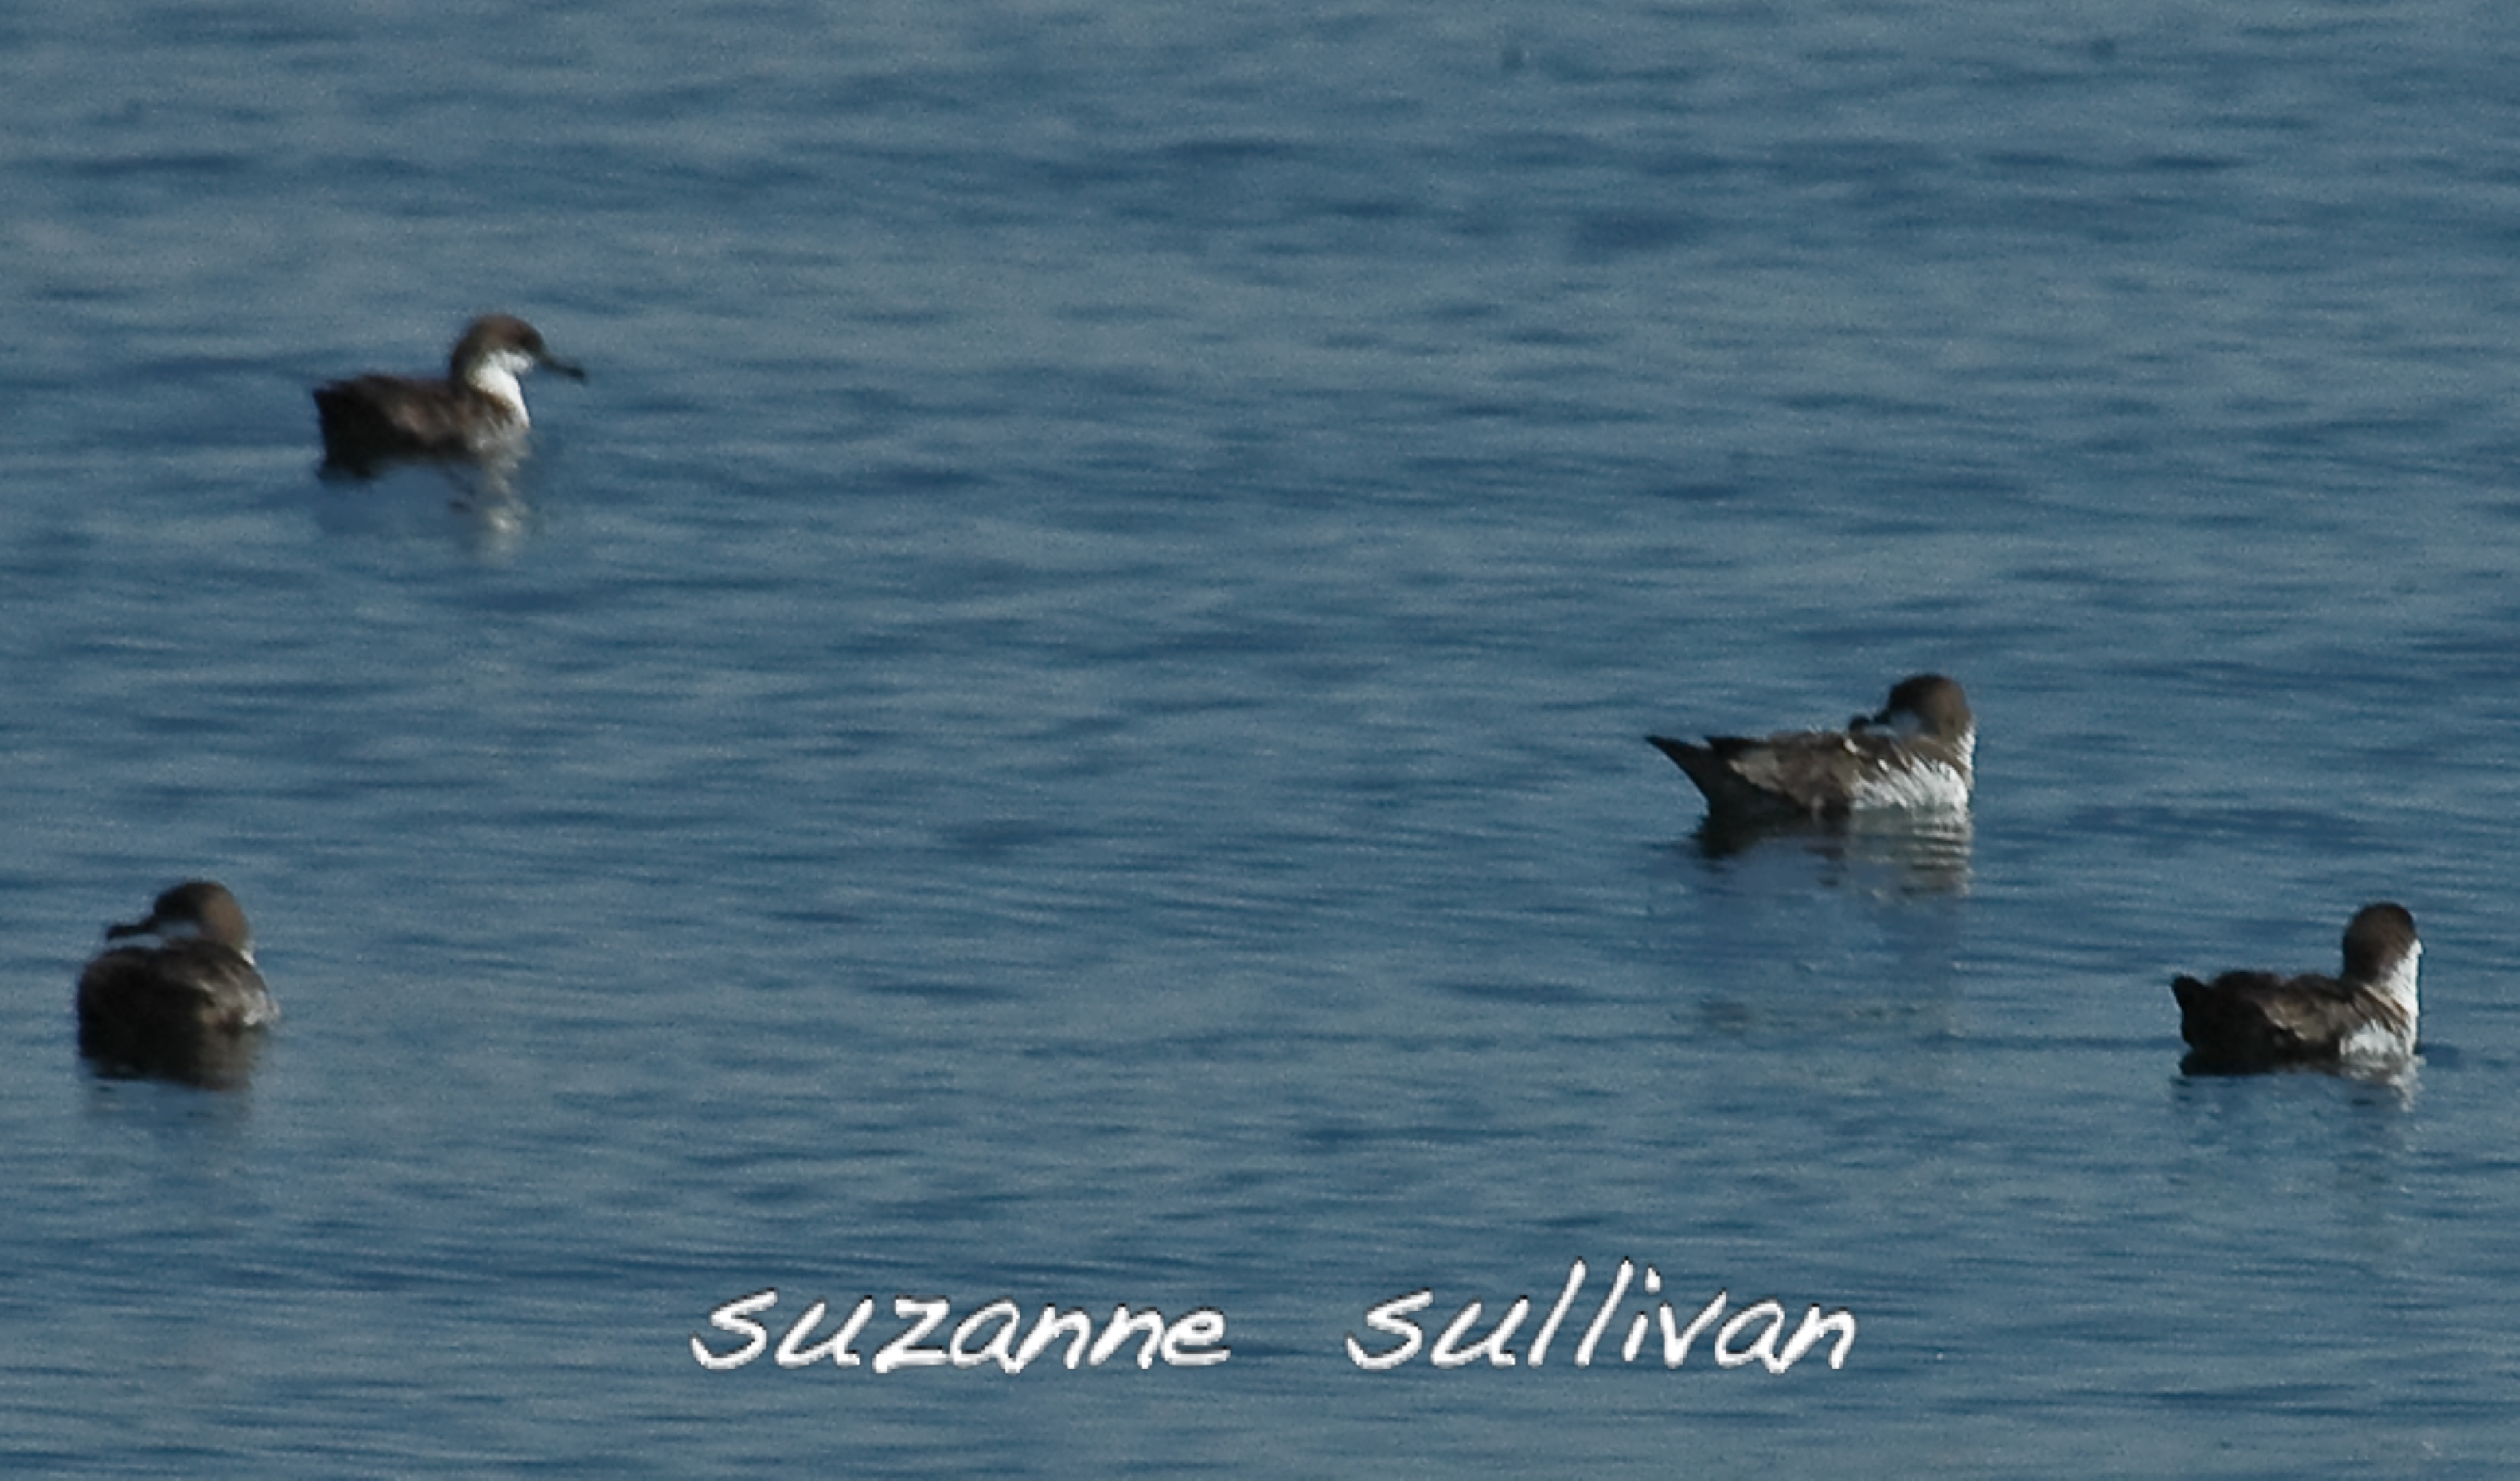 greater shearwaters